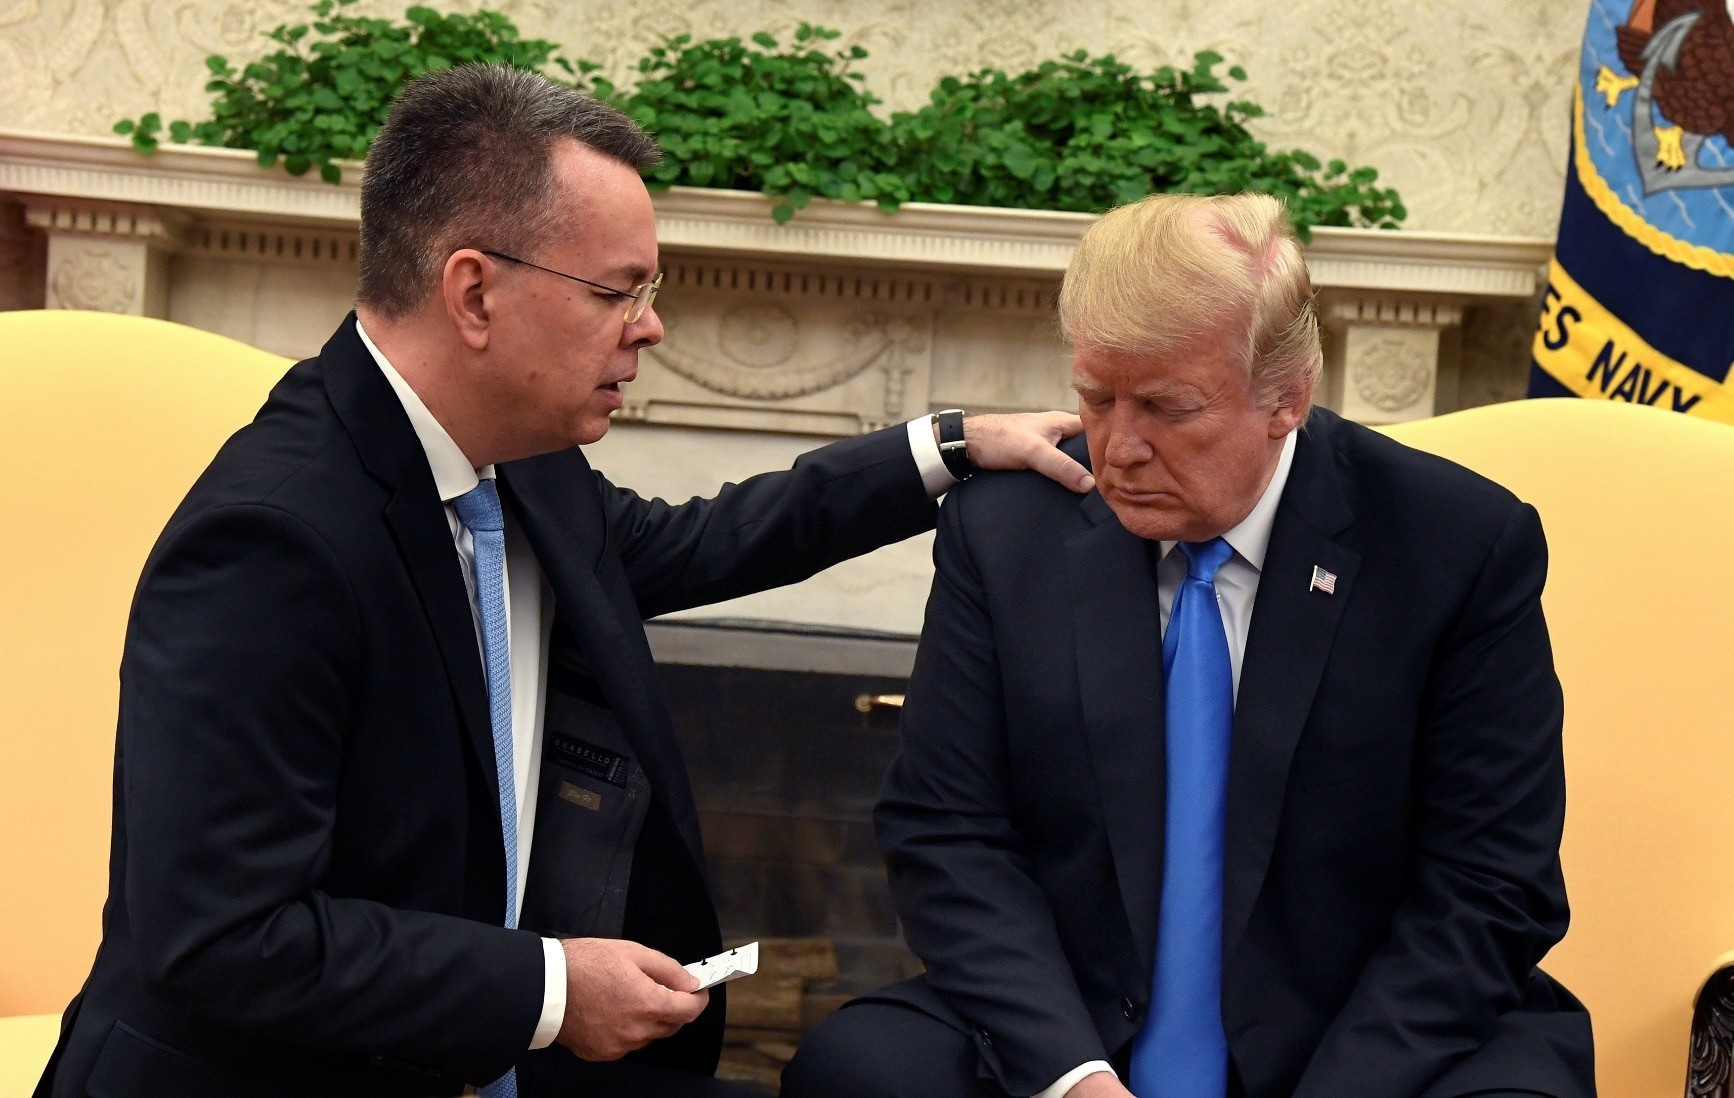 U.S. President Donald Trump closes his eyes in prayer along with pastor Andrew Brunson, after his release from two years of detention in Turkey, in the Oval Office of the White House, Washington, Oct. 13. 